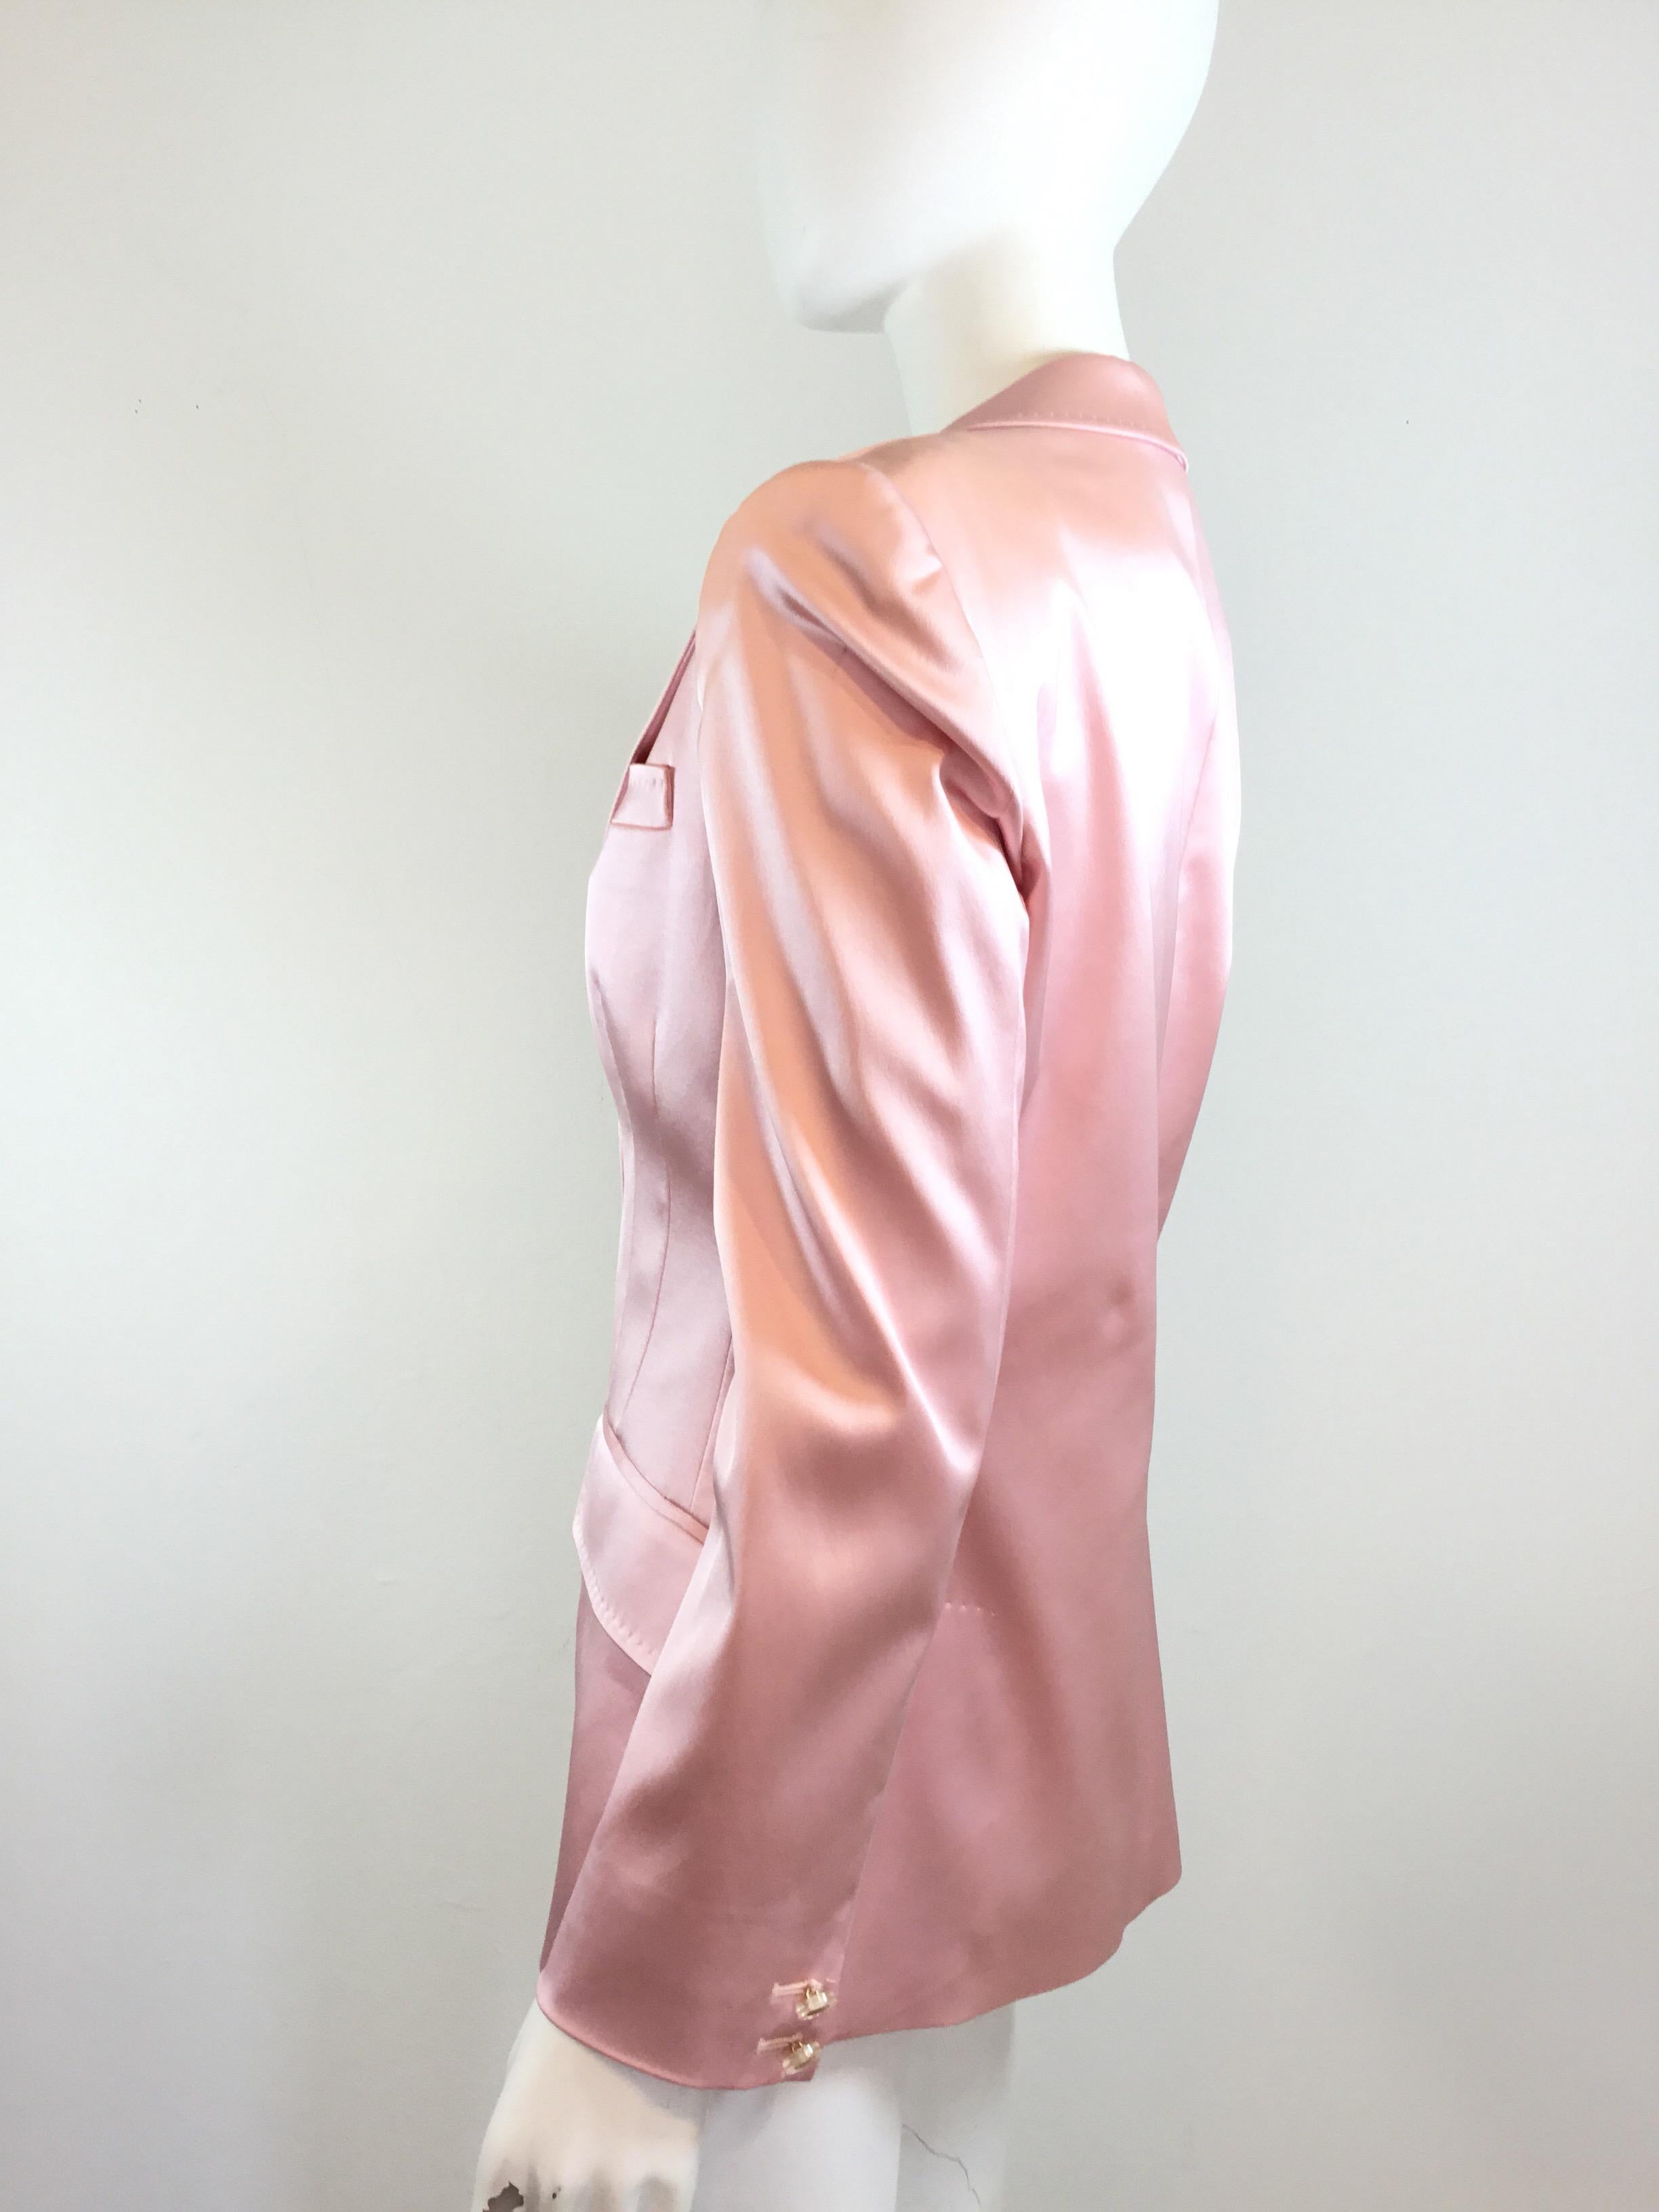 MINT condition Versace blazer in a pastel pink color, satin fabric. Blazer has button closures at the front and at the cuffs. Full lining, size 44, made in Italy. There is a total of 3 pockets in which all have been unused. 

Measurements:
Bust 38”,